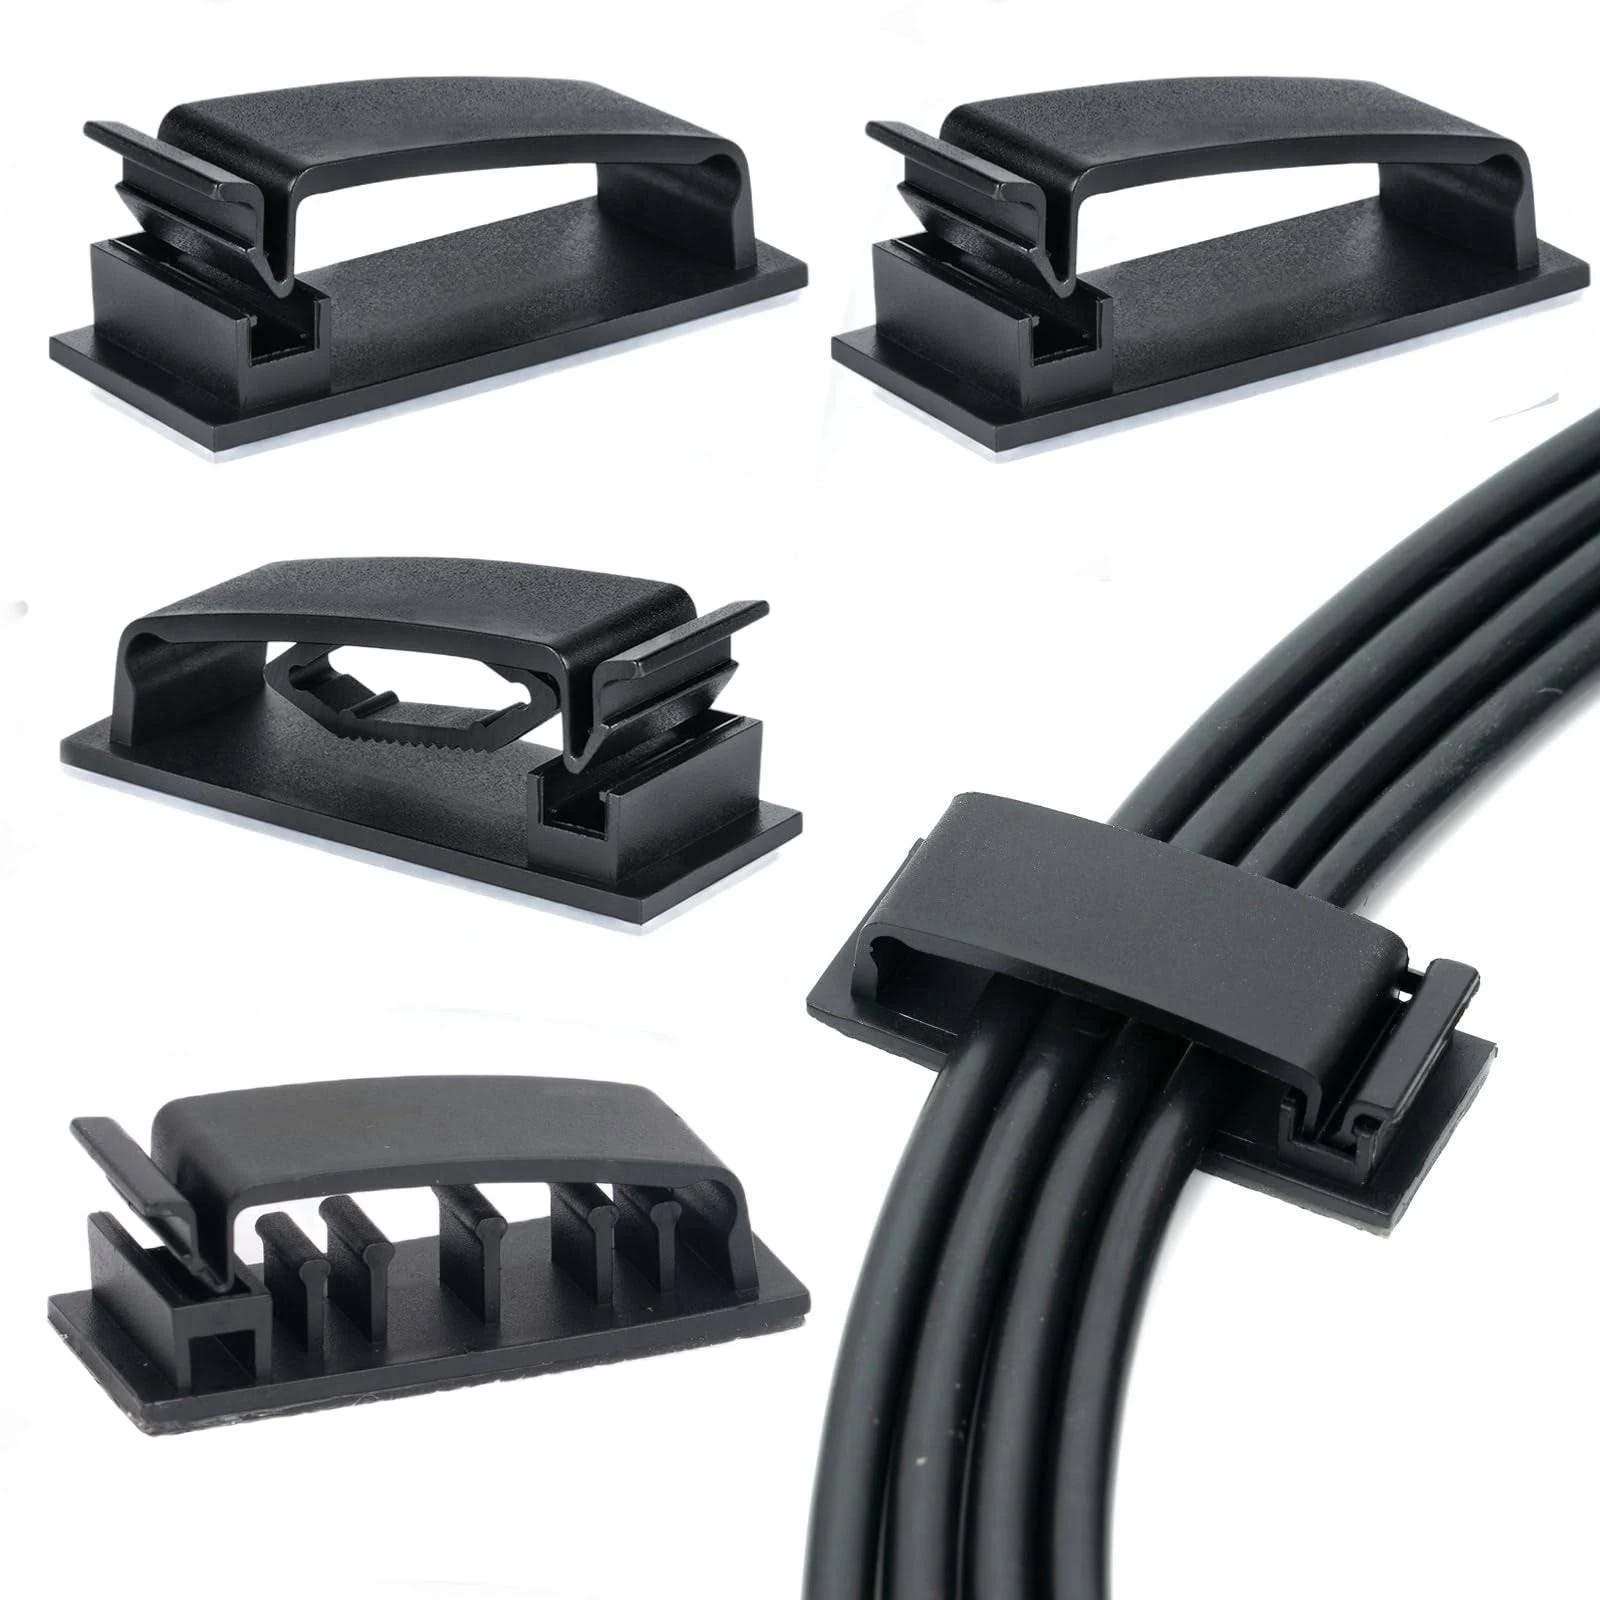 Helboar Cable Clips: 50pcs Self-Adhesive Wire Organizers for Appliances and PCs | Image